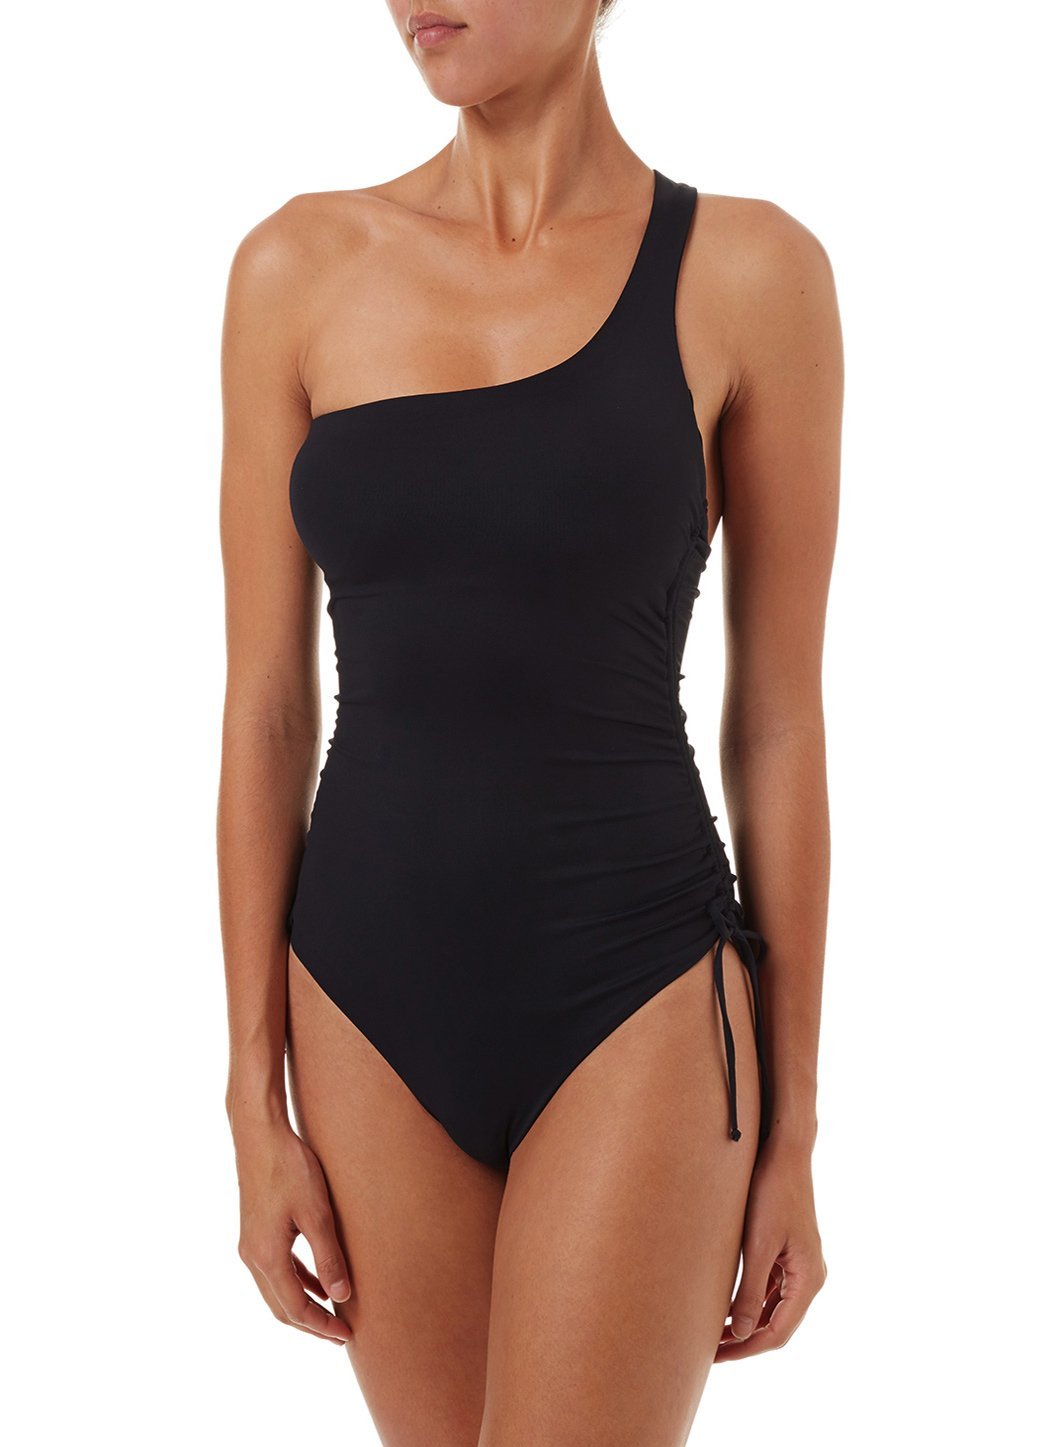 polynesia black oneshoulder ruched onepiece swimsuit 2019 F